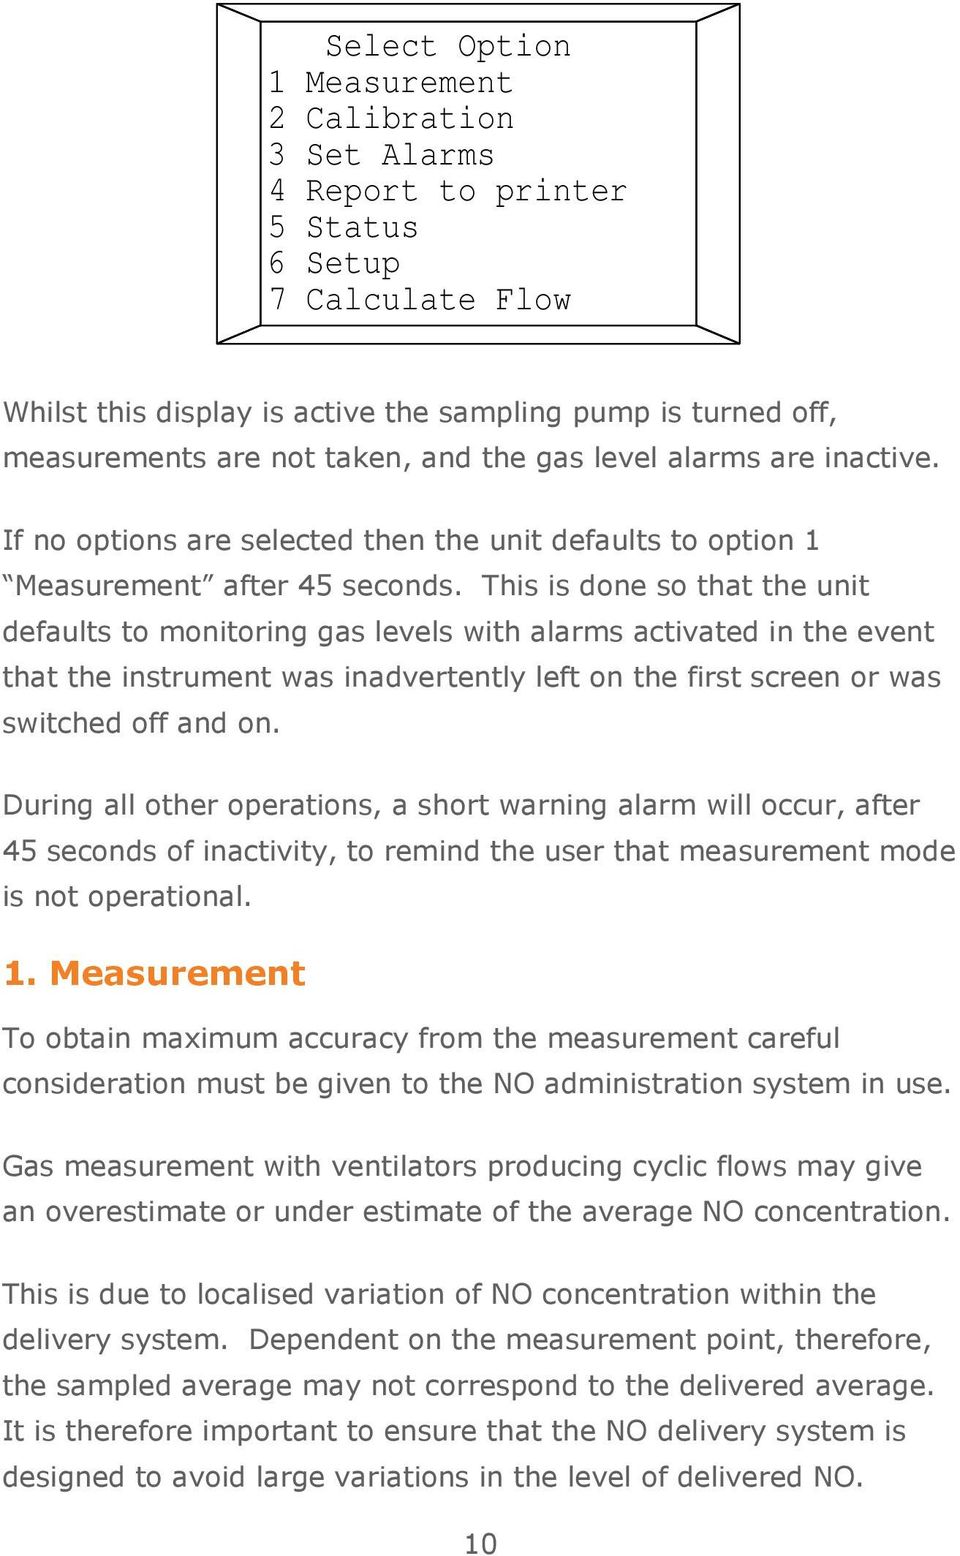 This is done so that the unit defaults to monitoring gas levels with alarms activated in the event that the instrument was inadvertently left on the first screen or was switched off and on.